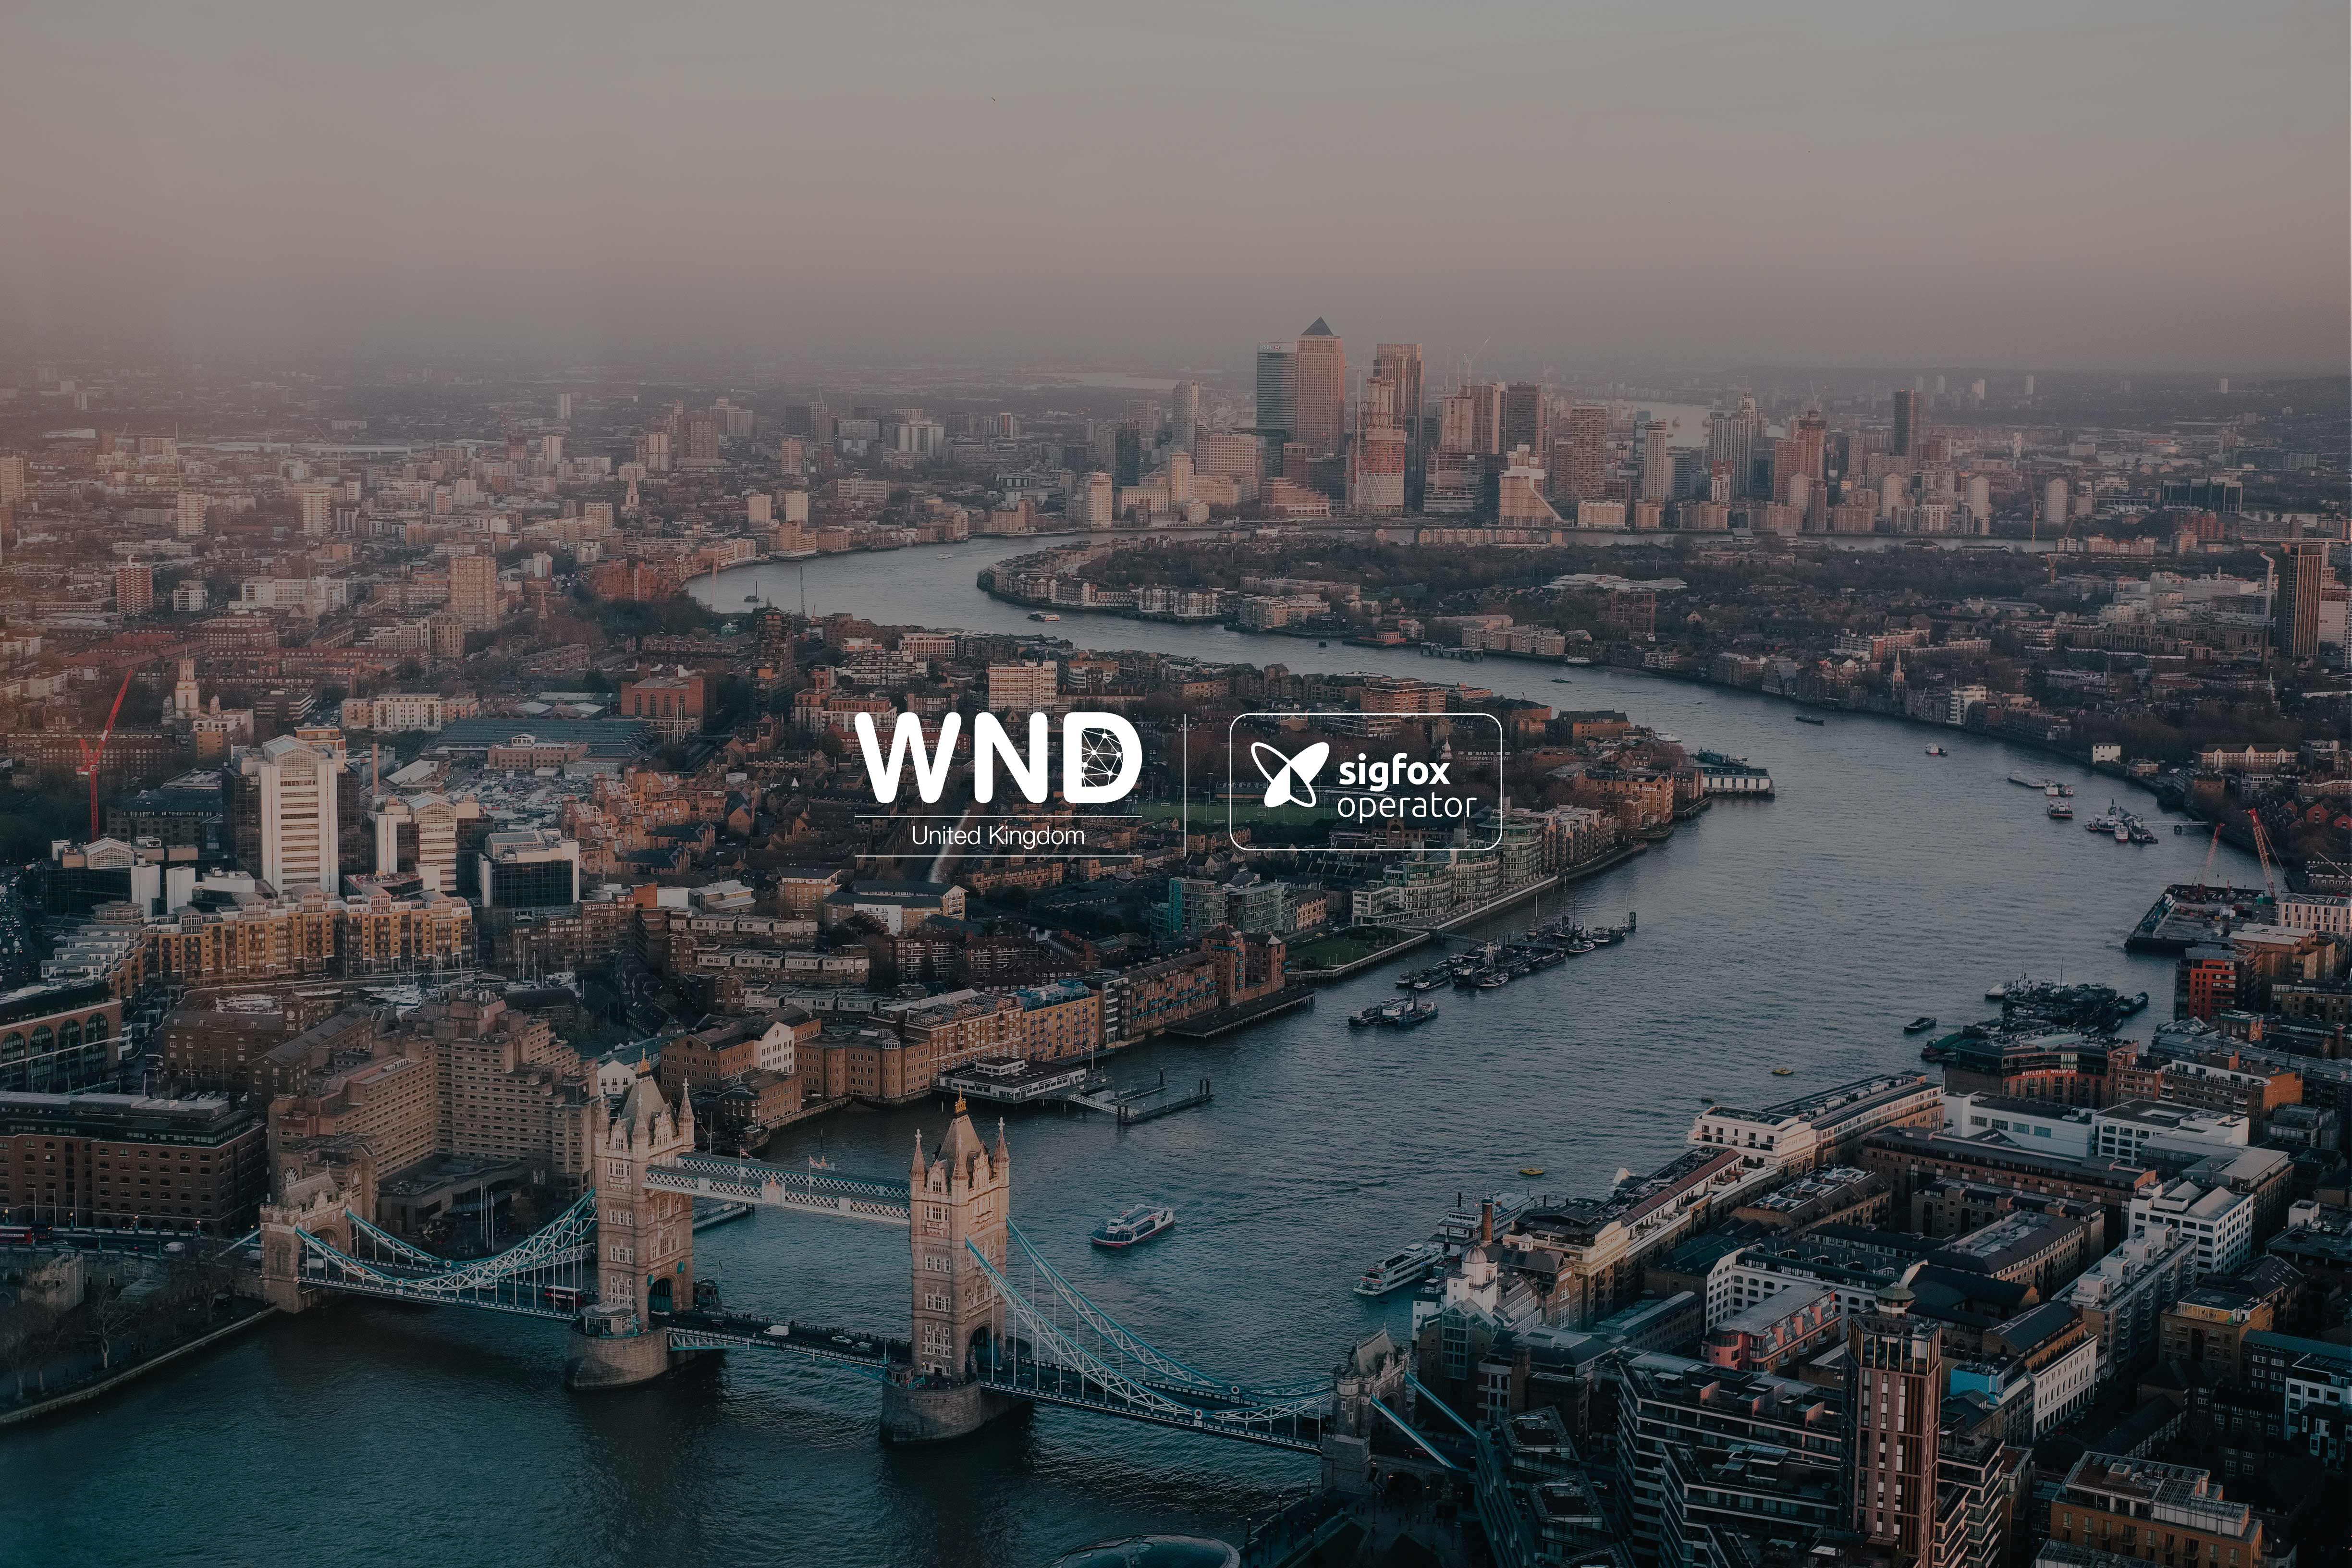 WNDUK, Sigfox network operator for the UK  announces 1,000 base station installs covering more than 50 million people